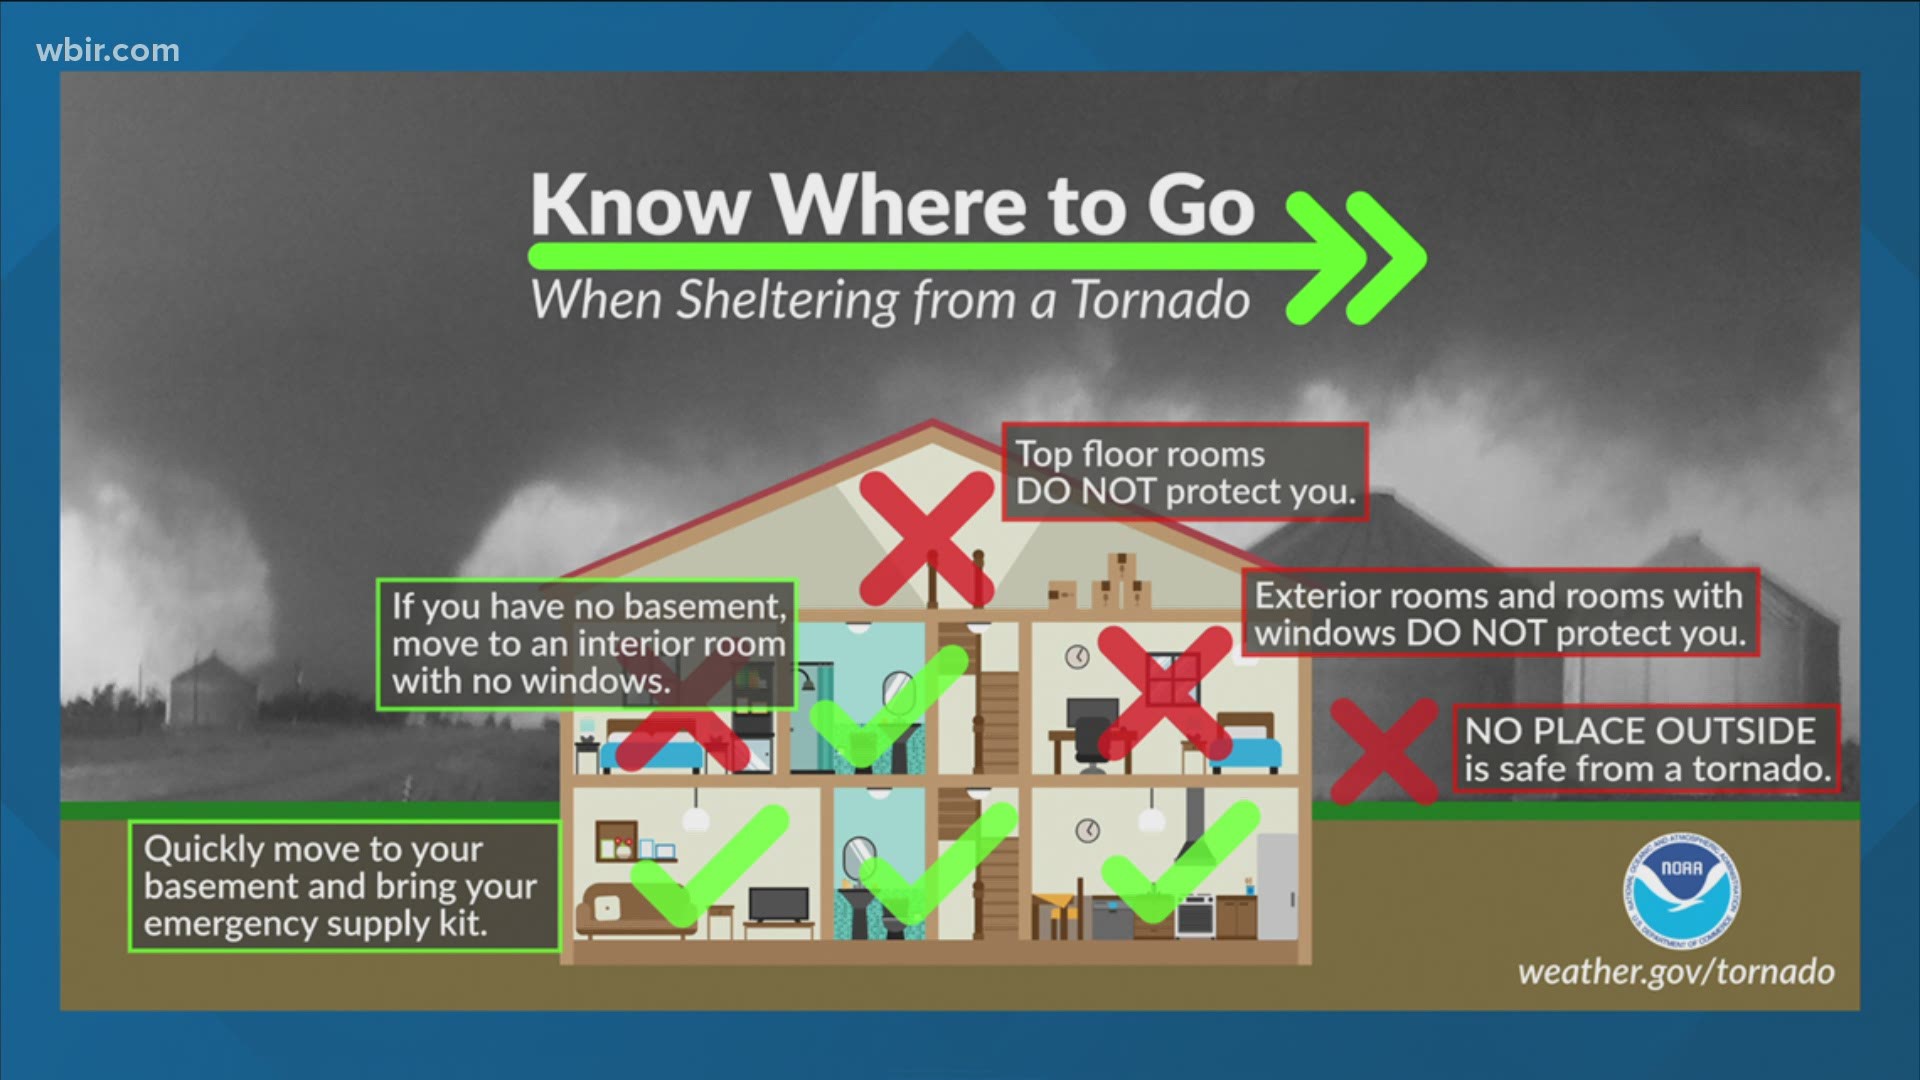 If there is a tornado warning in your area, it's good to have a plan for where you will take shelter.